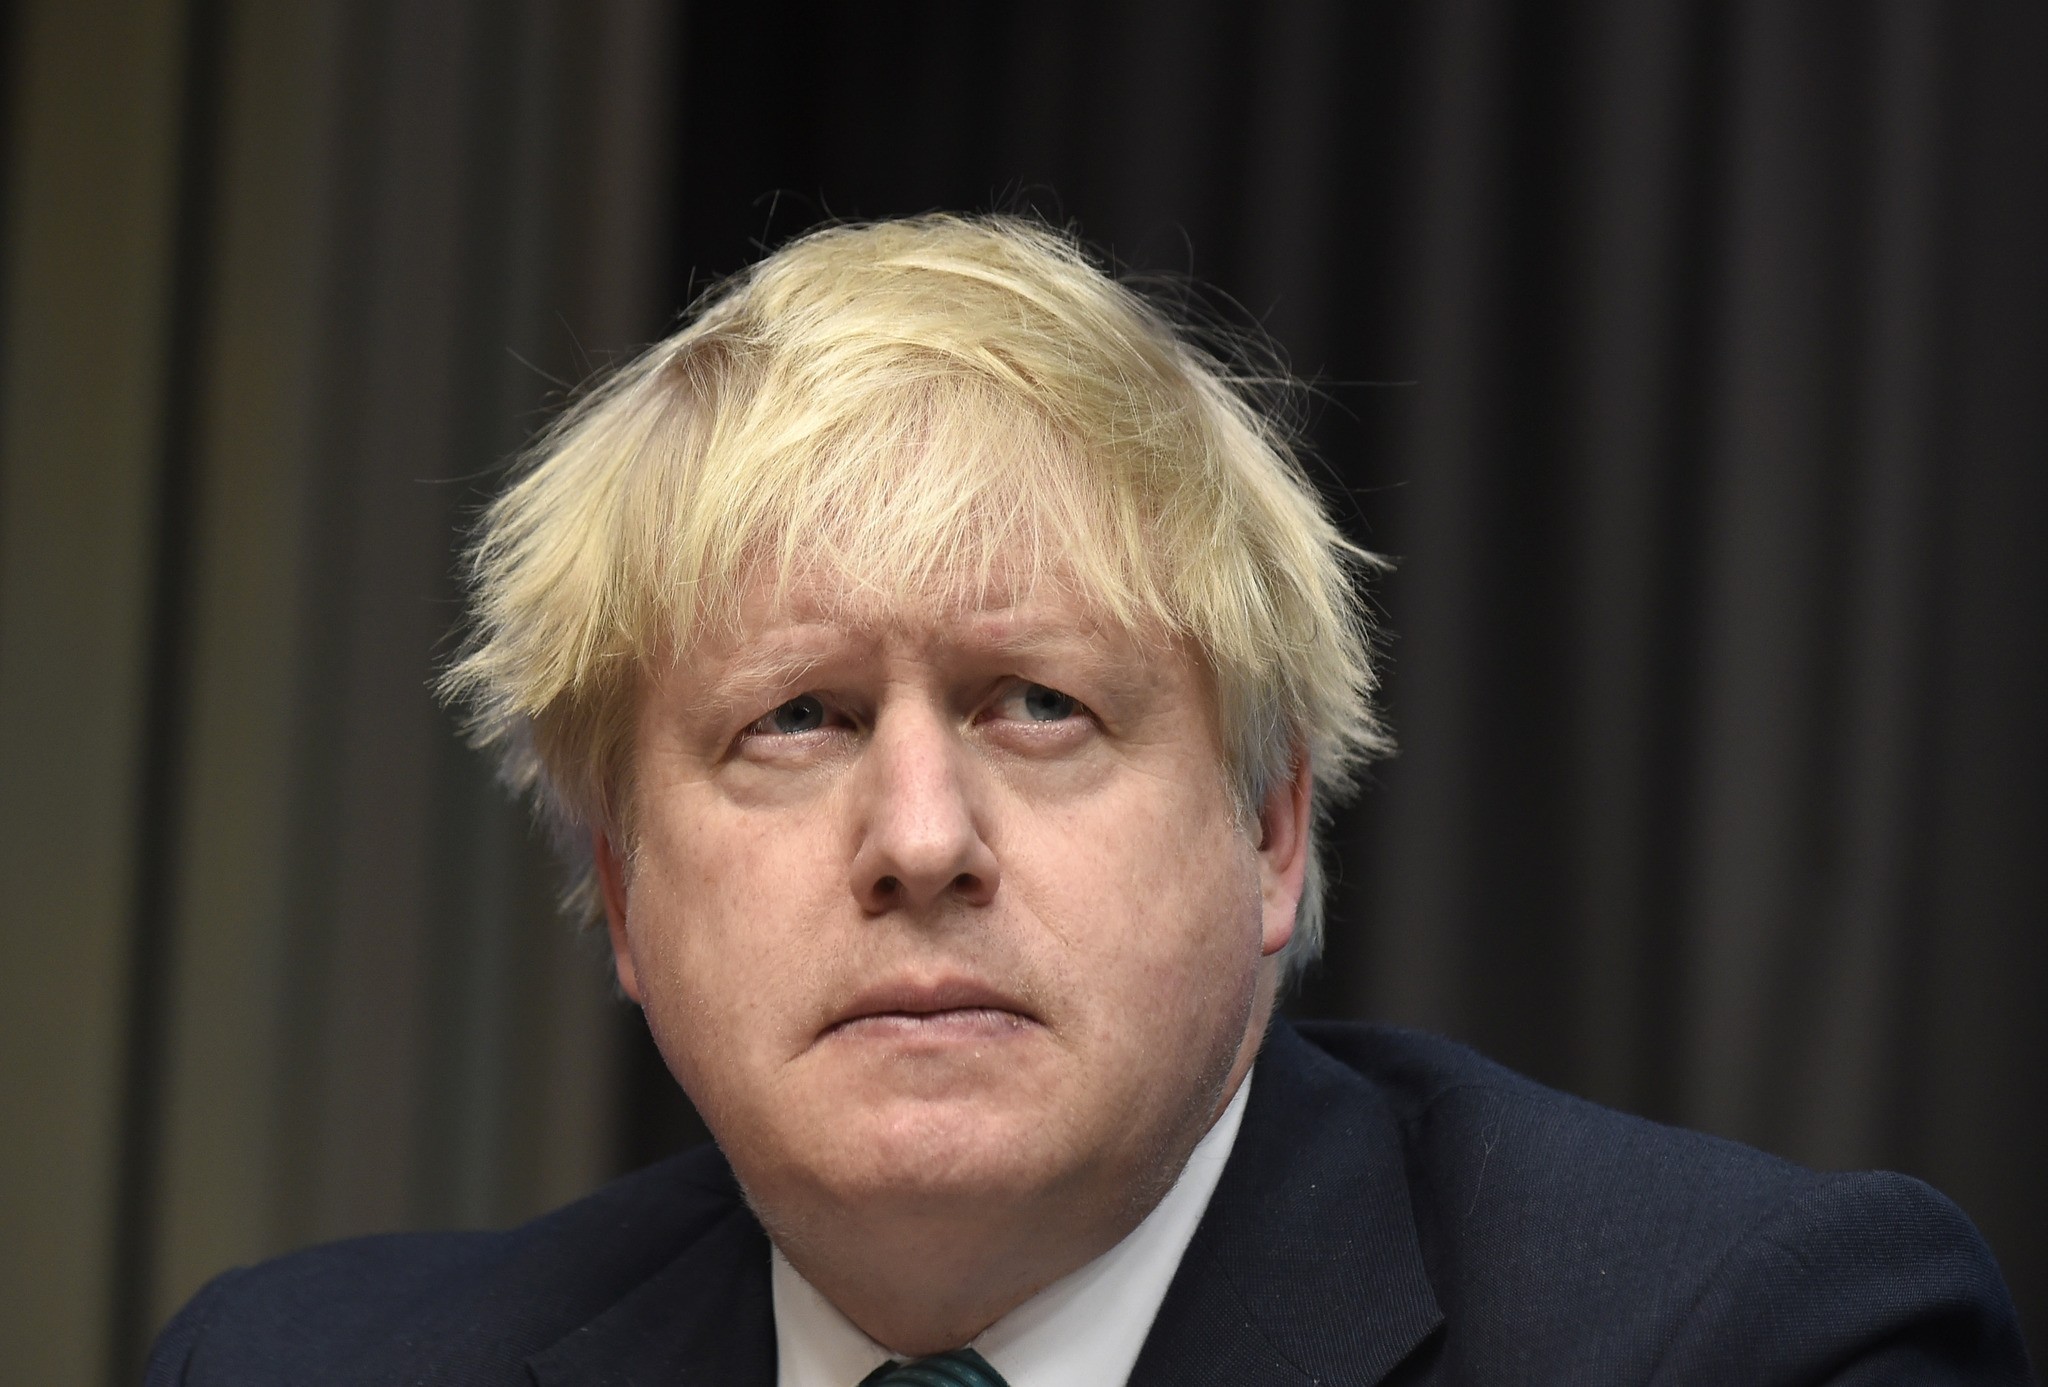 British Foreign Secretary Boris Johnson attends a press conference on the Syria crisis in Brussels, on April 5, 2017. (AFP Photo)